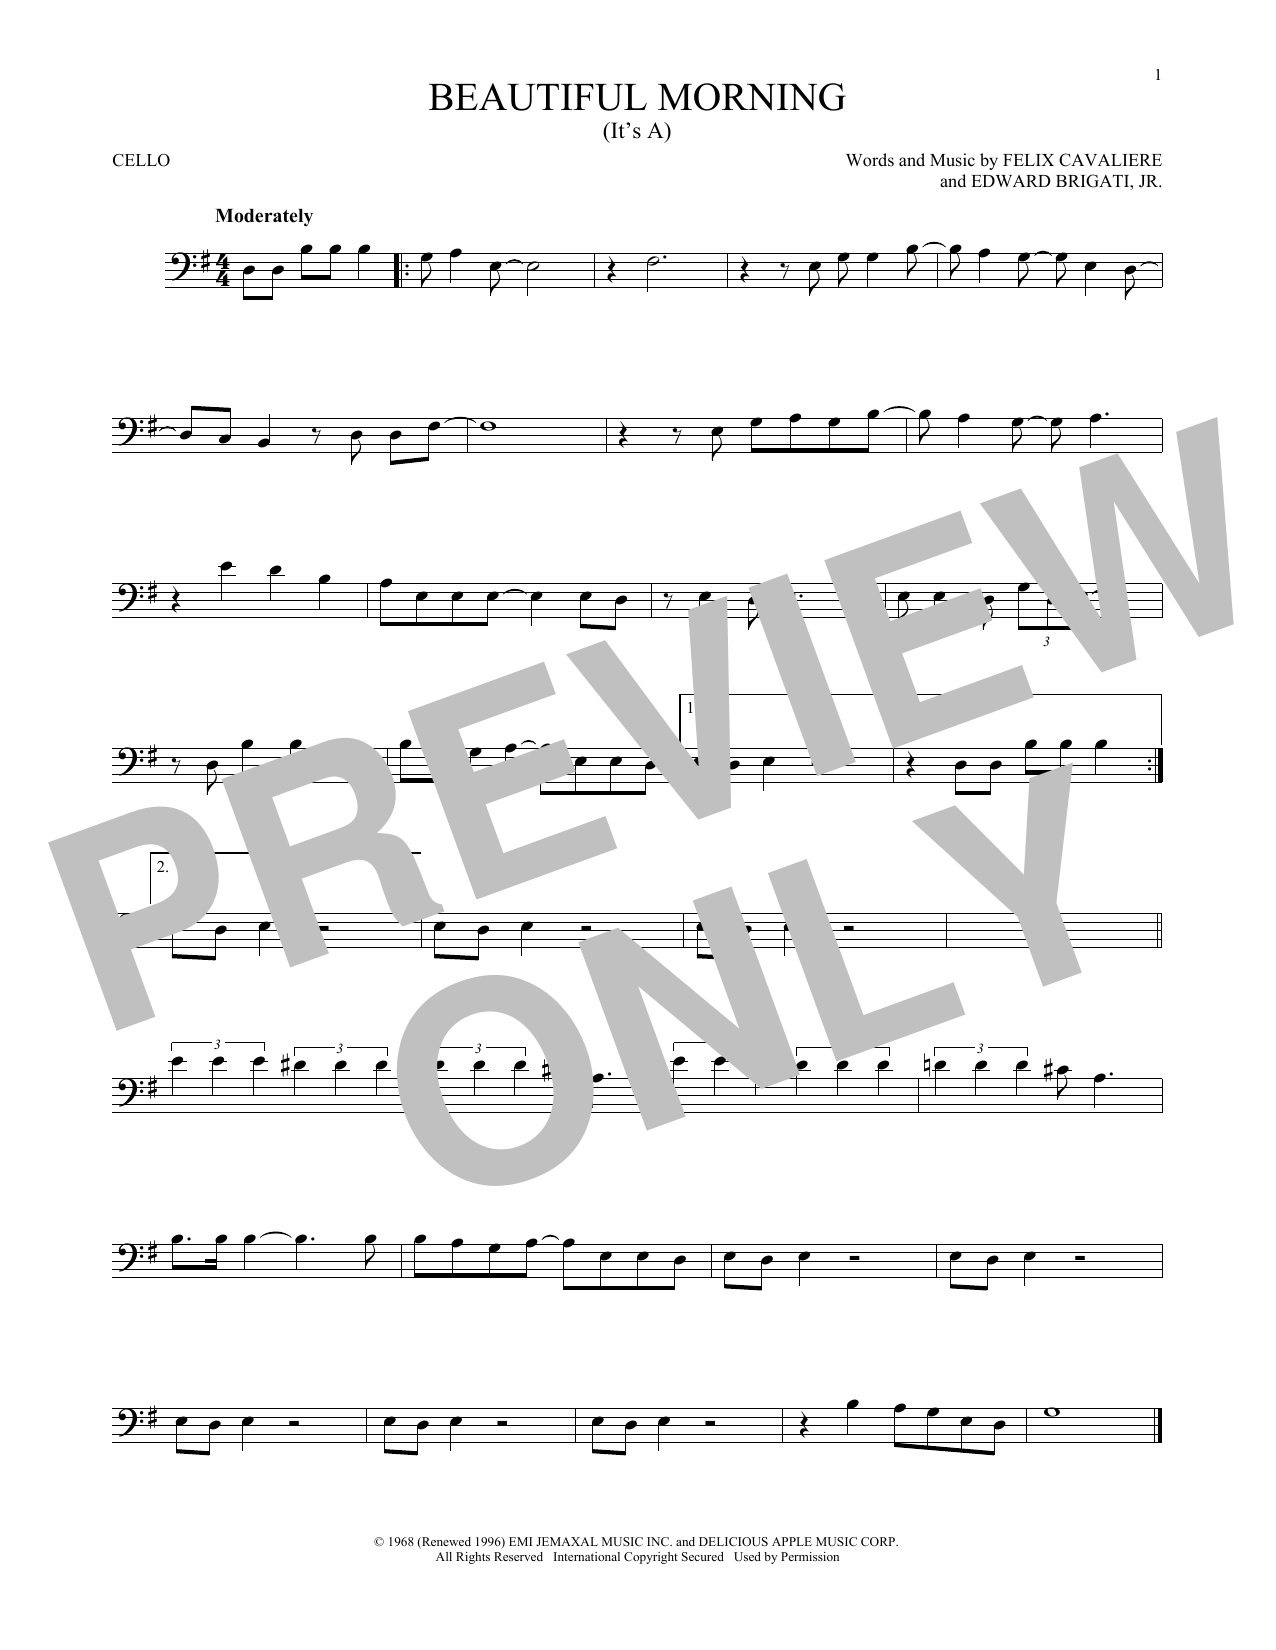 Download The Rascals (It's A) Beautiful Morning Sheet Music